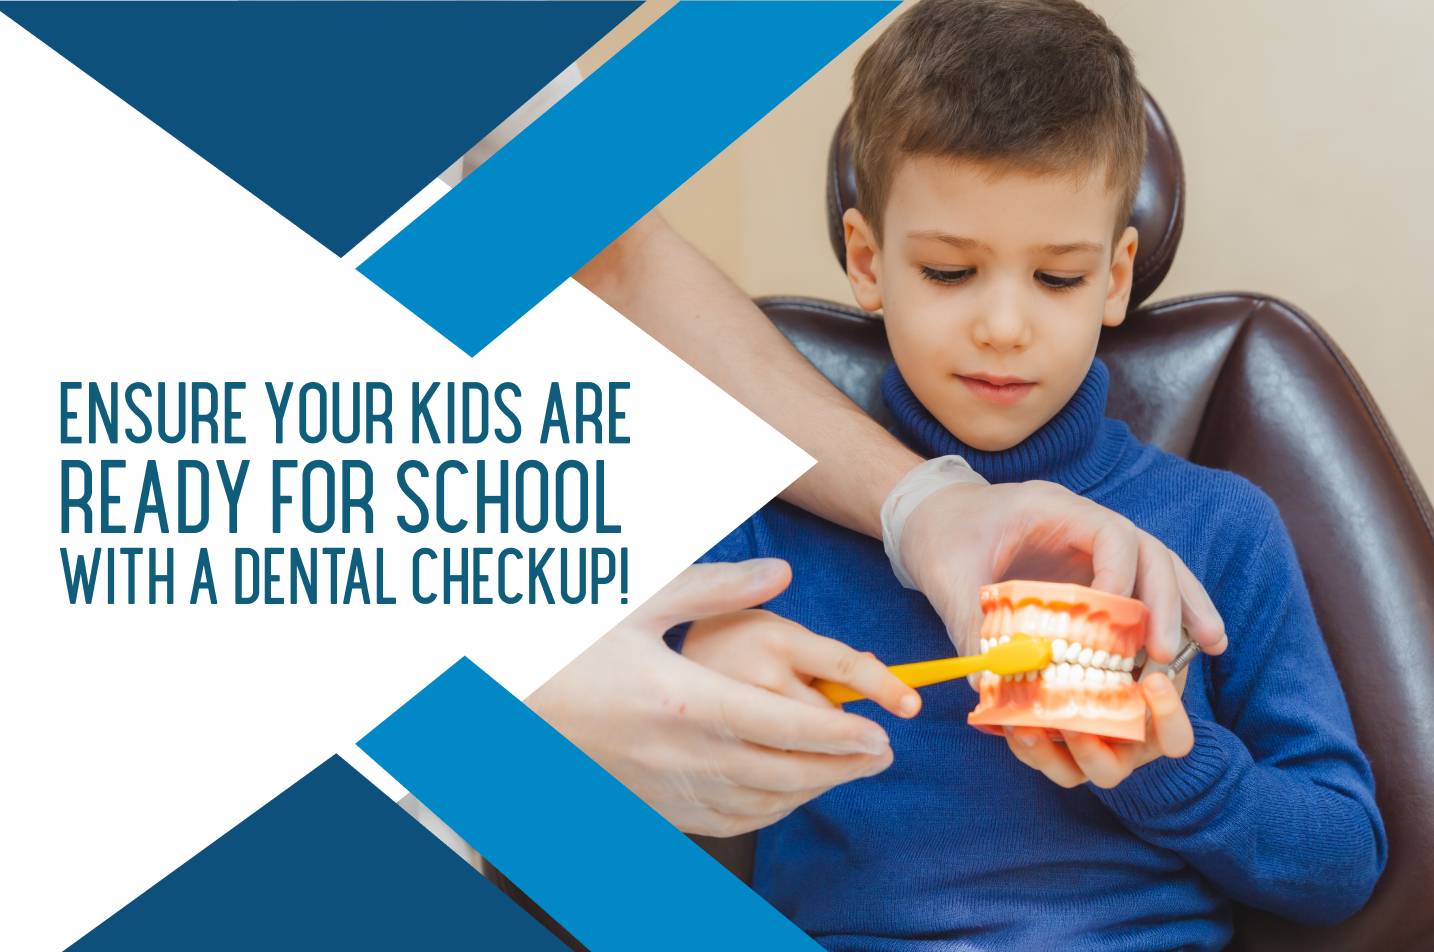 Ensure your kids are ready for school with a dental checkup!